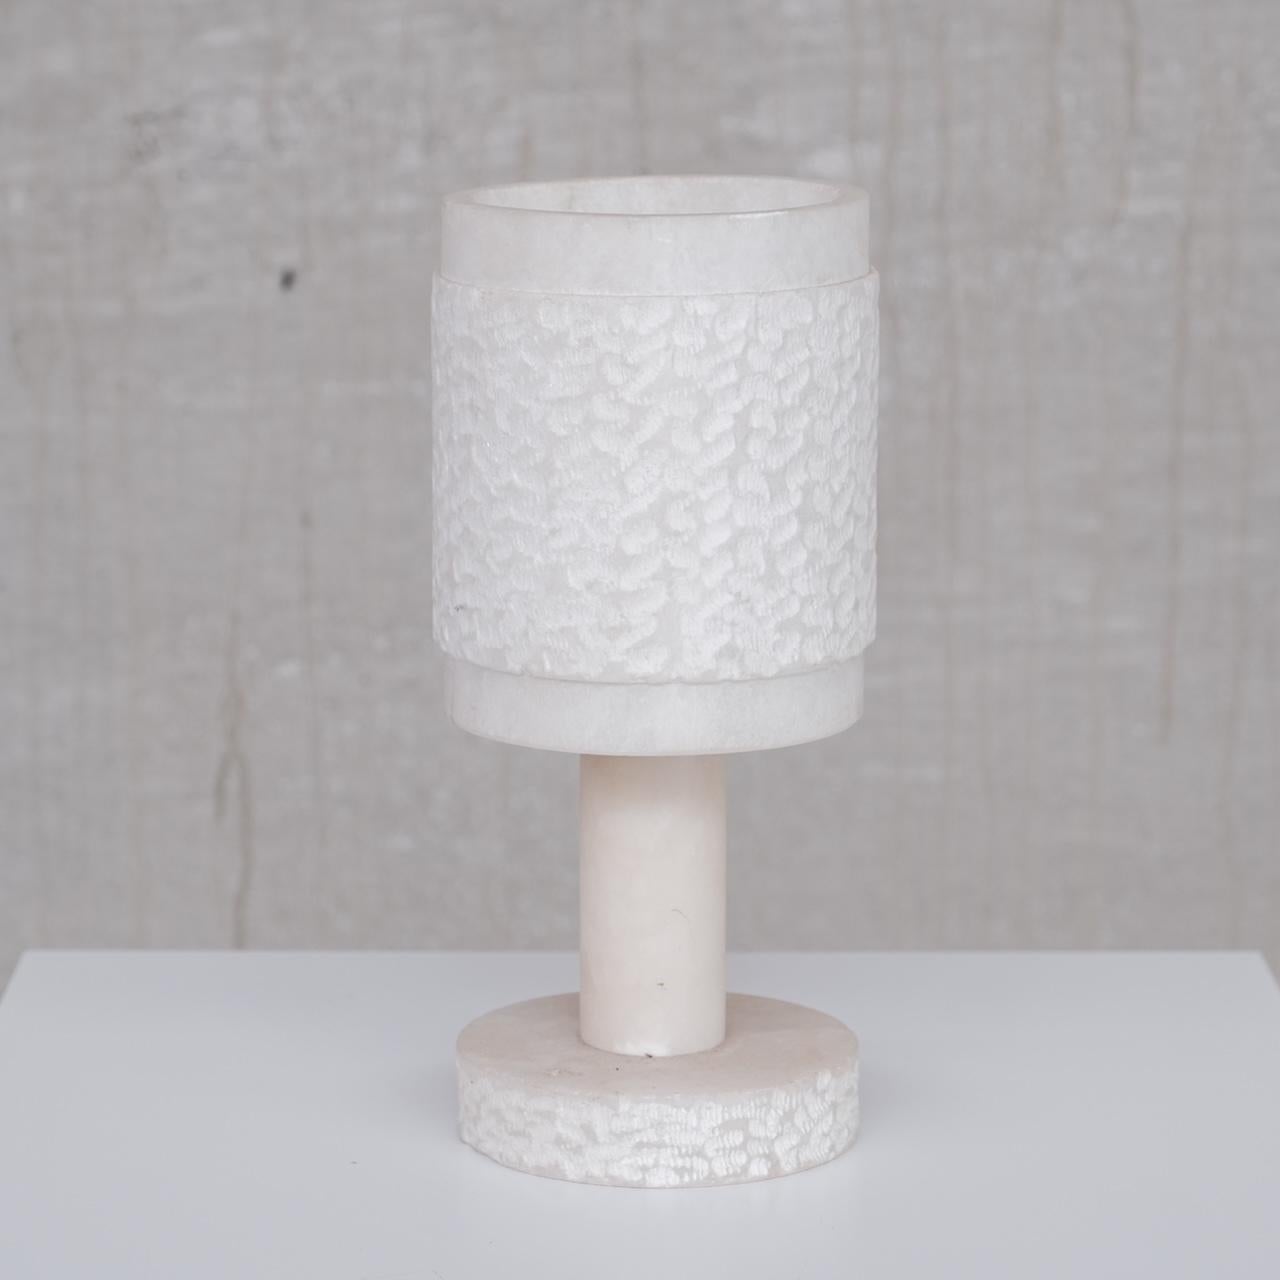 An alabaster table lamp. 

France, c1950s. 

Sourced in a cluster of seven varied style alabaster lamps. 

Price is for the single lamp. 

Some scuffs and wear commensurate with age but generally good condition. 

Since re-wired and PAT